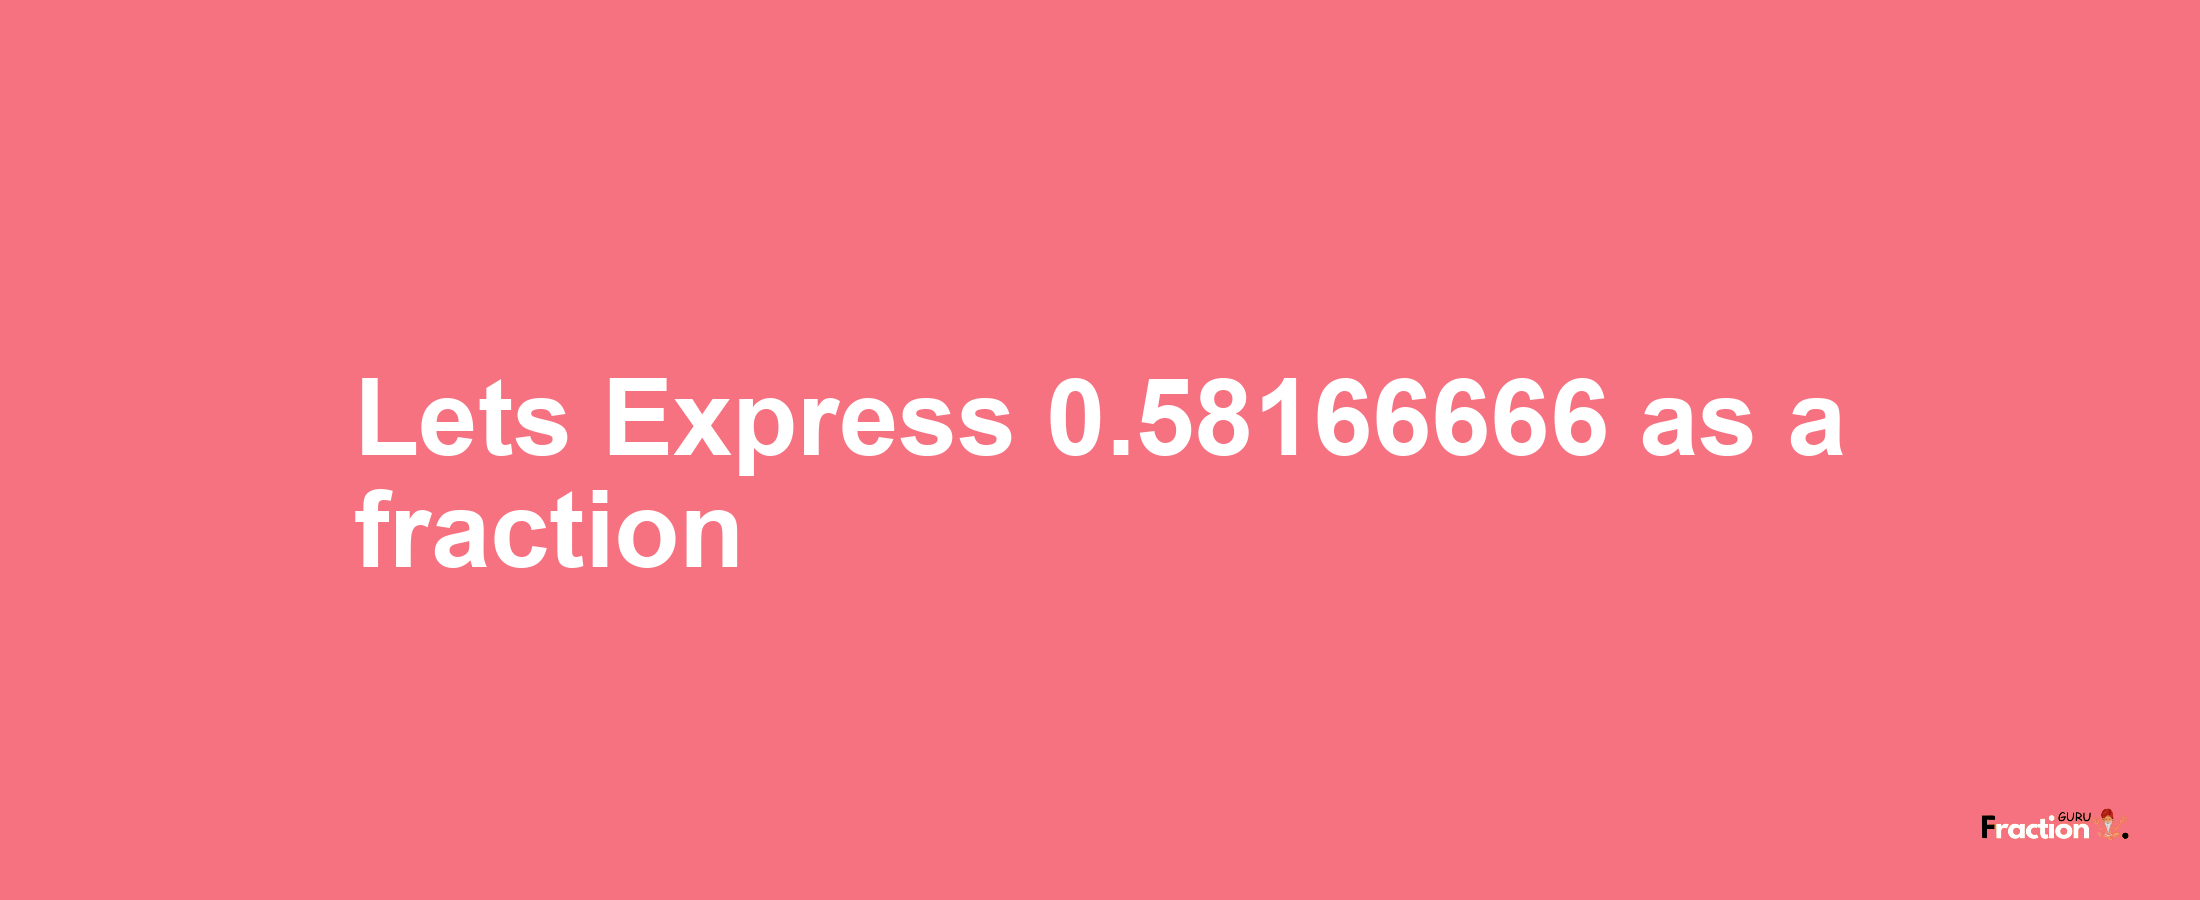 Lets Express 0.58166666 as afraction